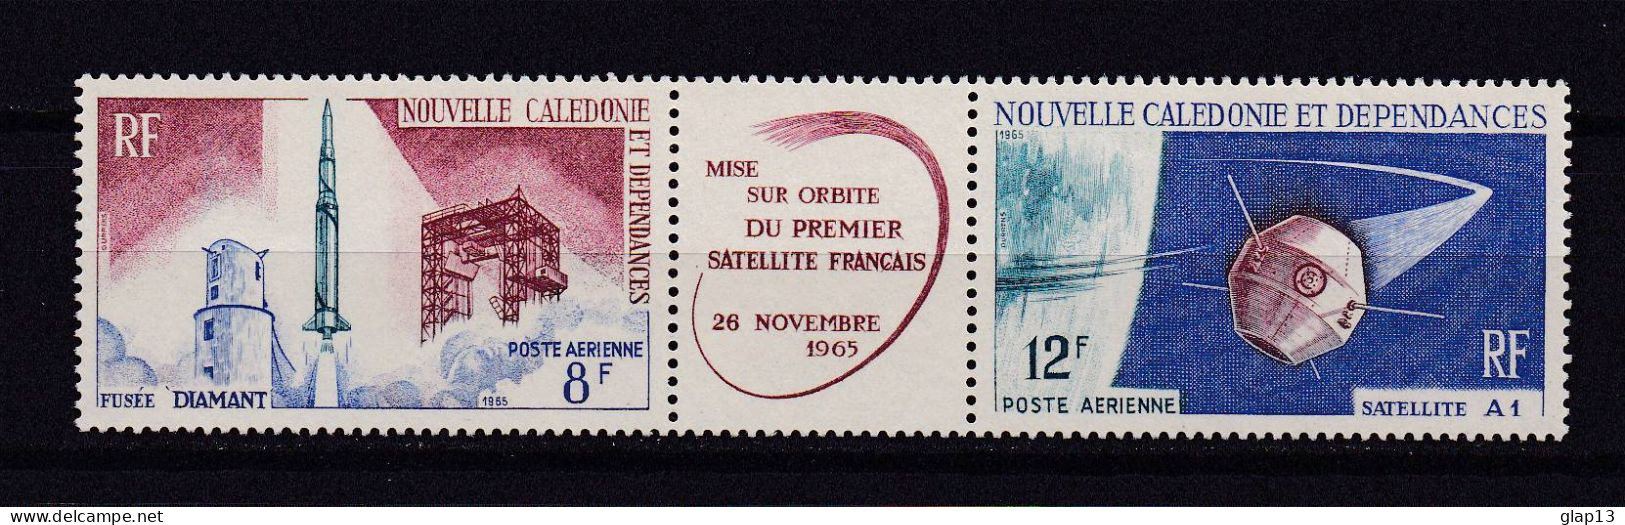 NOUVELLE-CALEDONIE 1966 PA N°85A NEUF AVEC CHARNIERE SATELLITE - Neufs